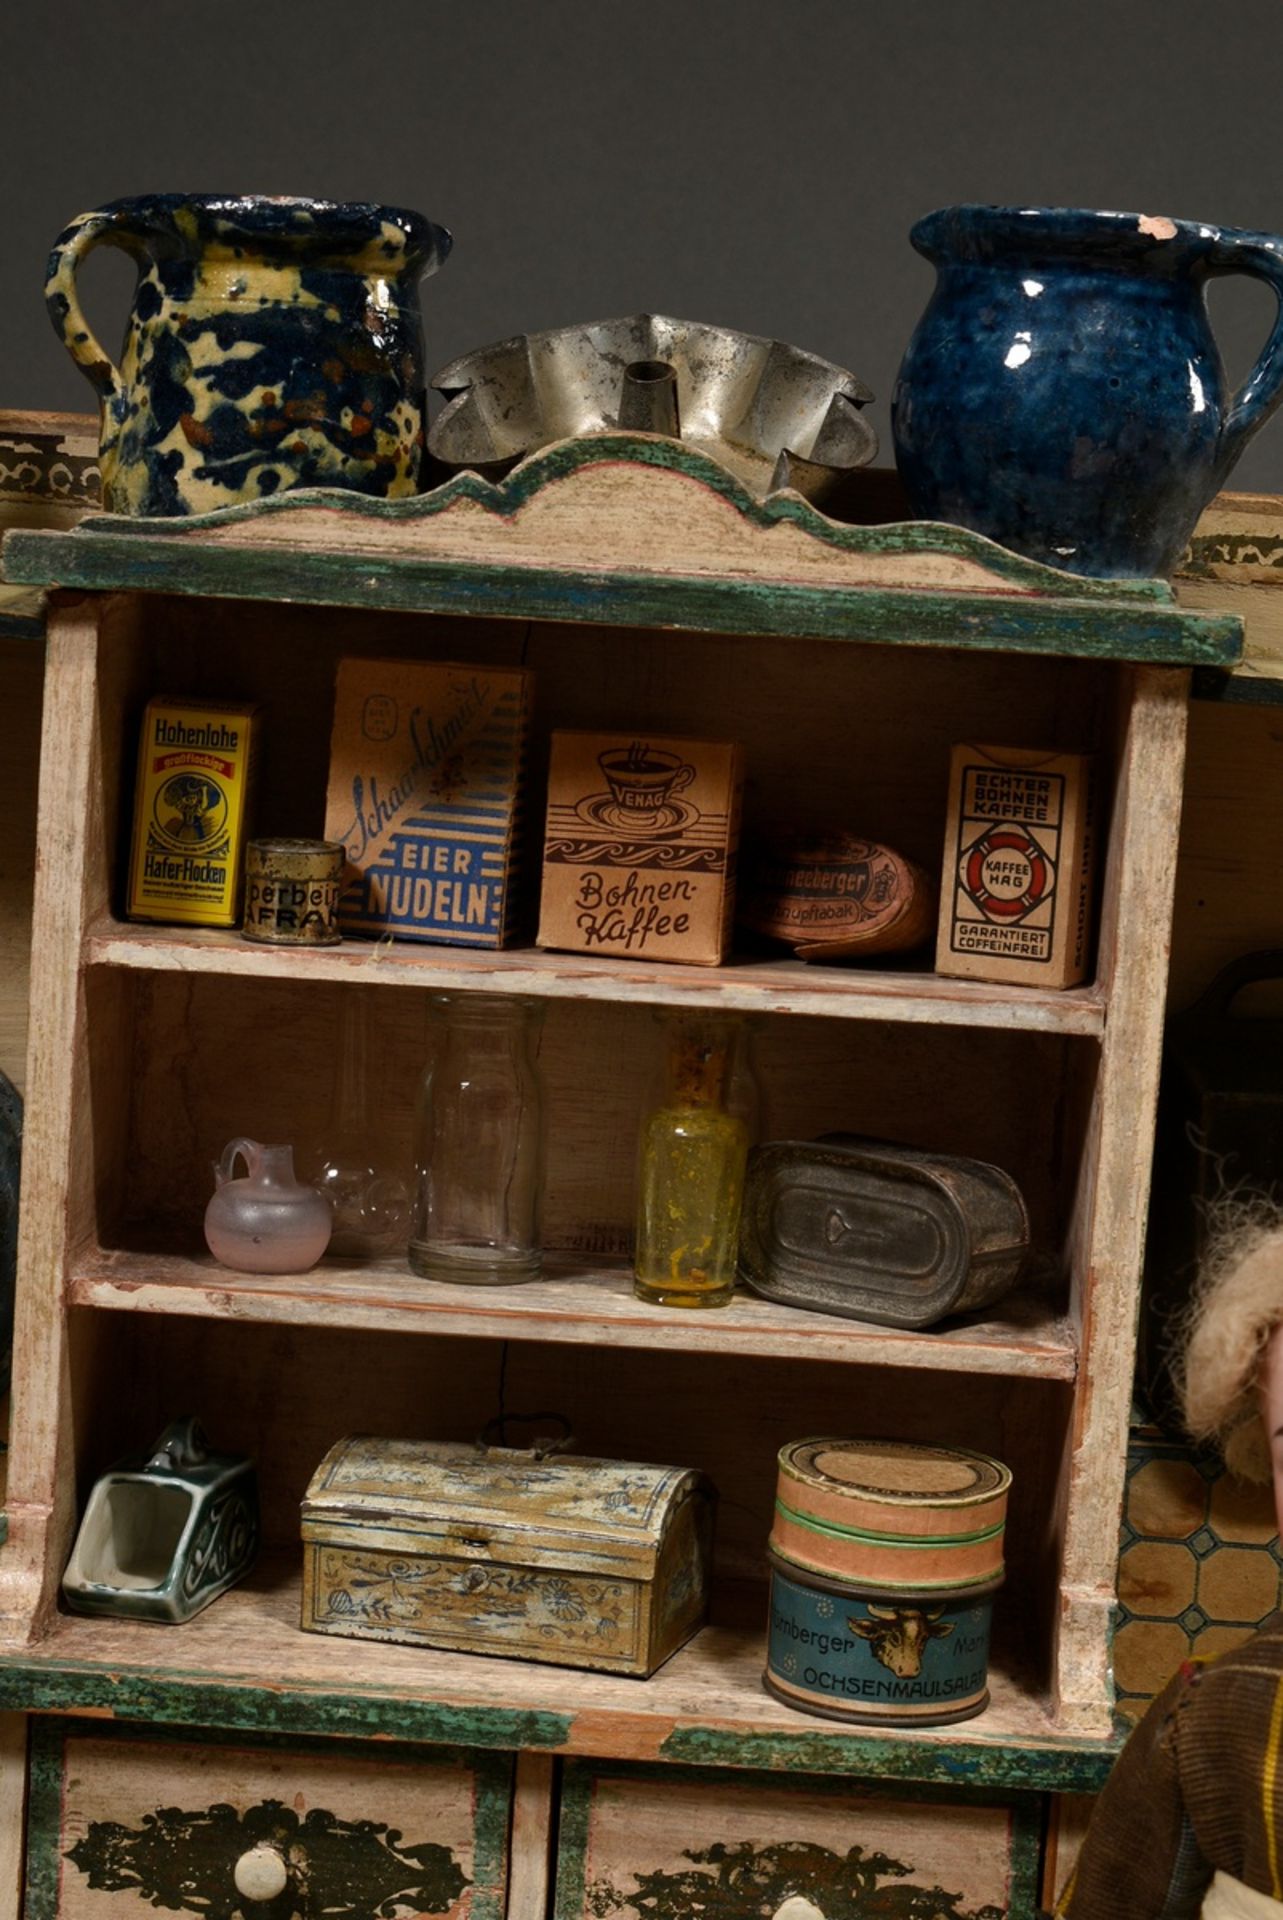 Wilhelminian period doll's kitchen with rich interior, metal cooker, earthenware and porcelain, pew - Image 7 of 18